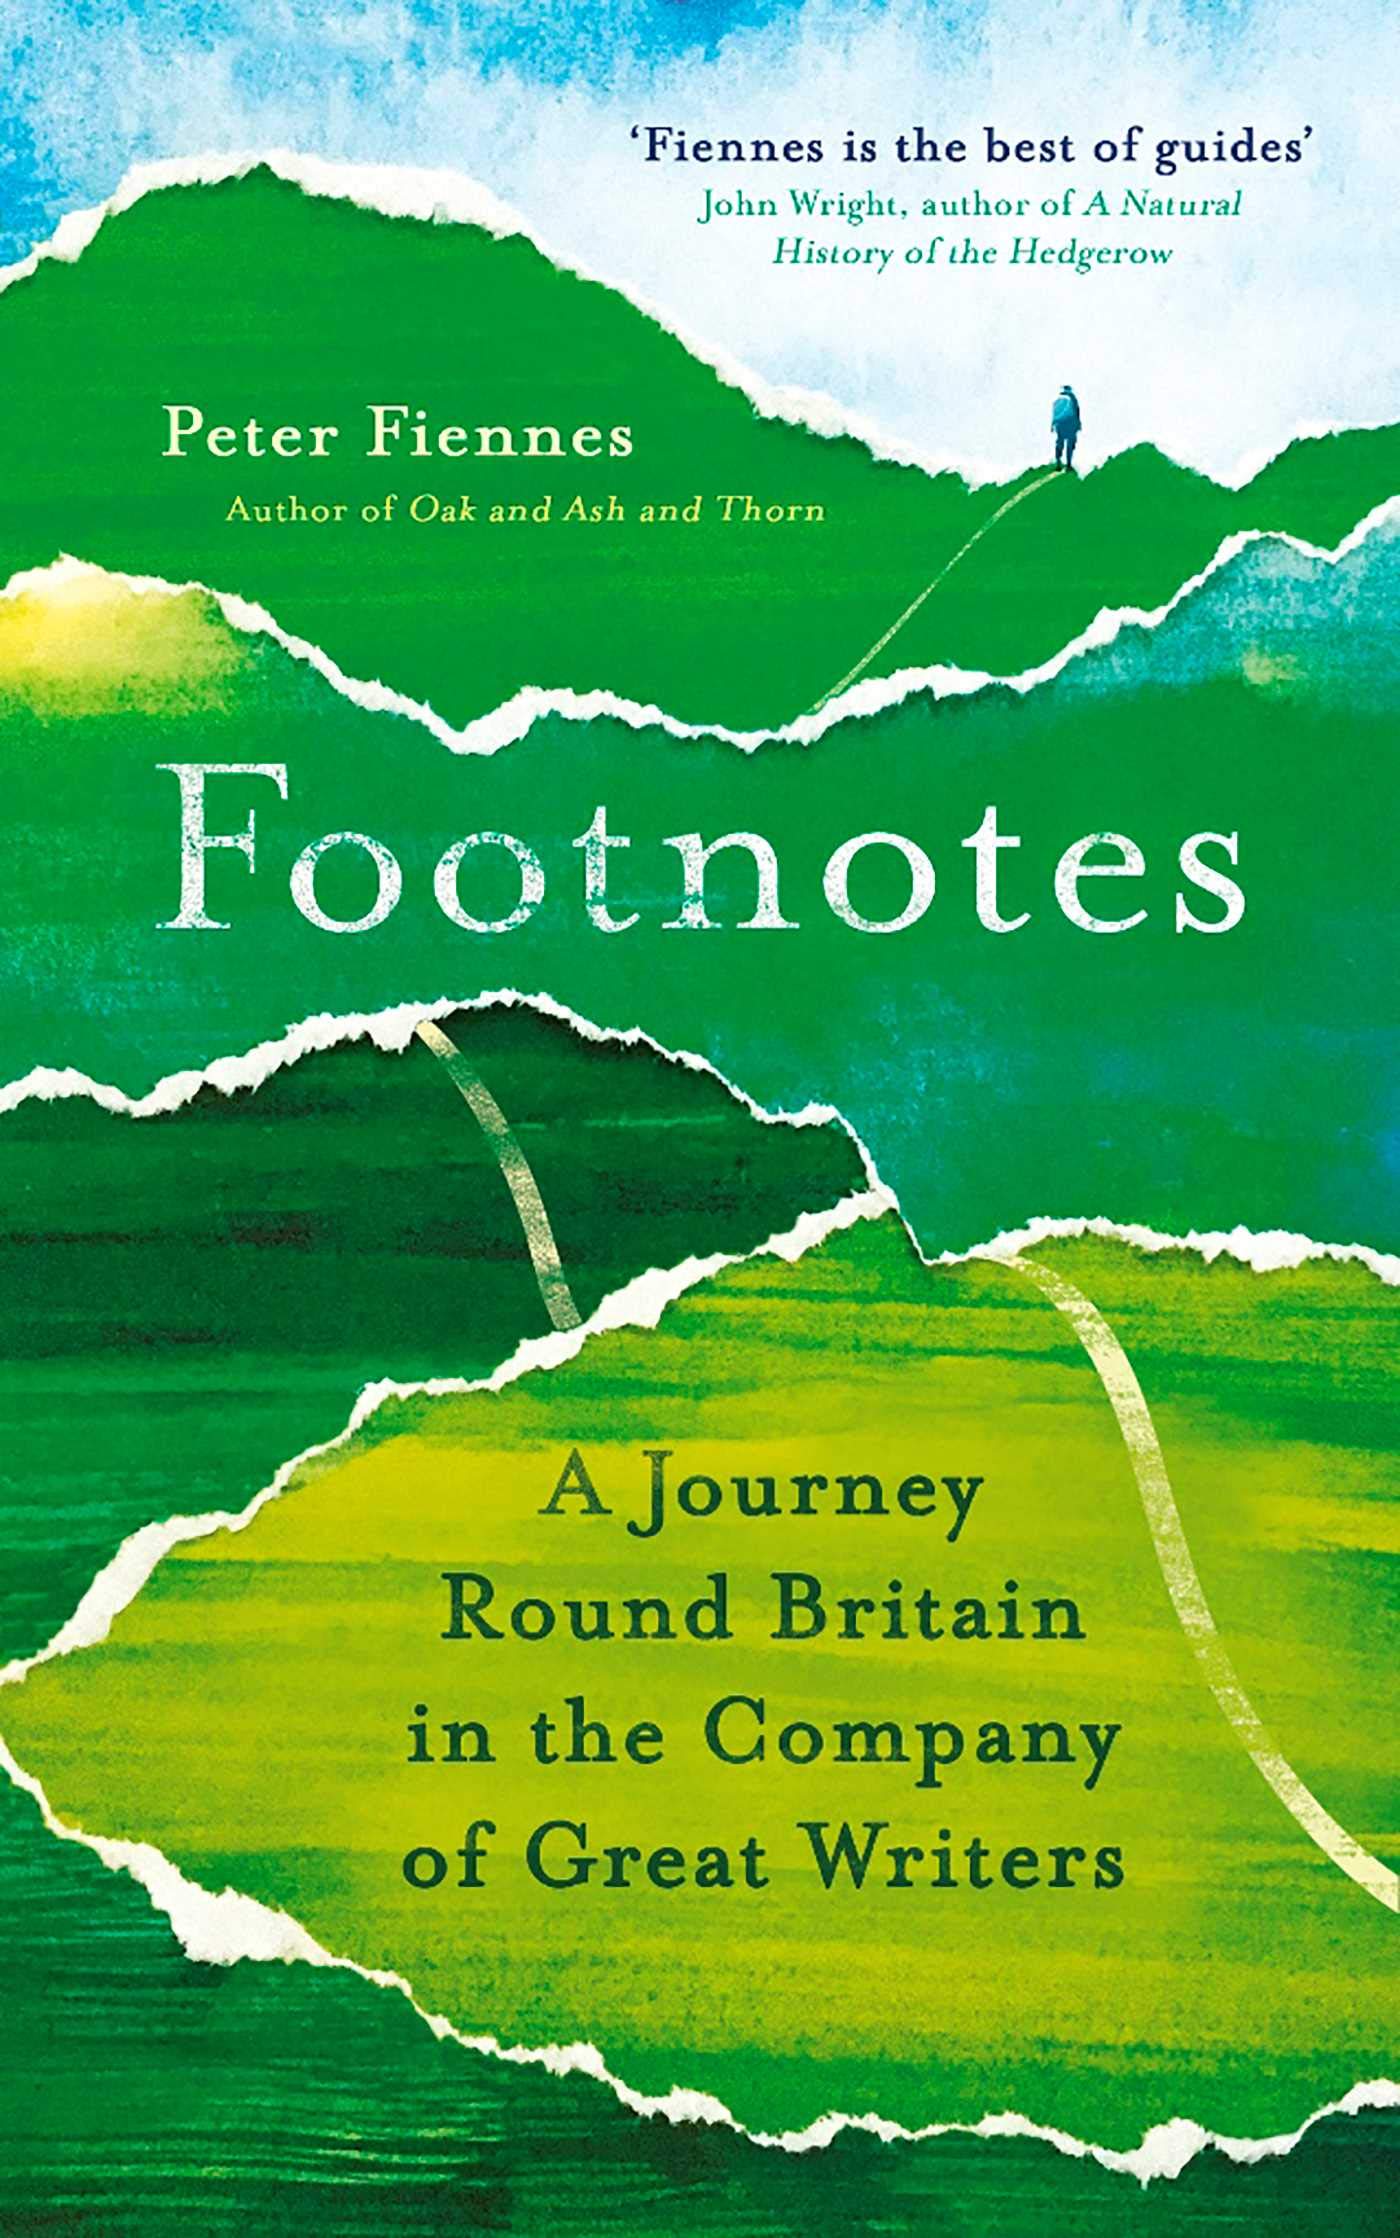 Footnotes book cover